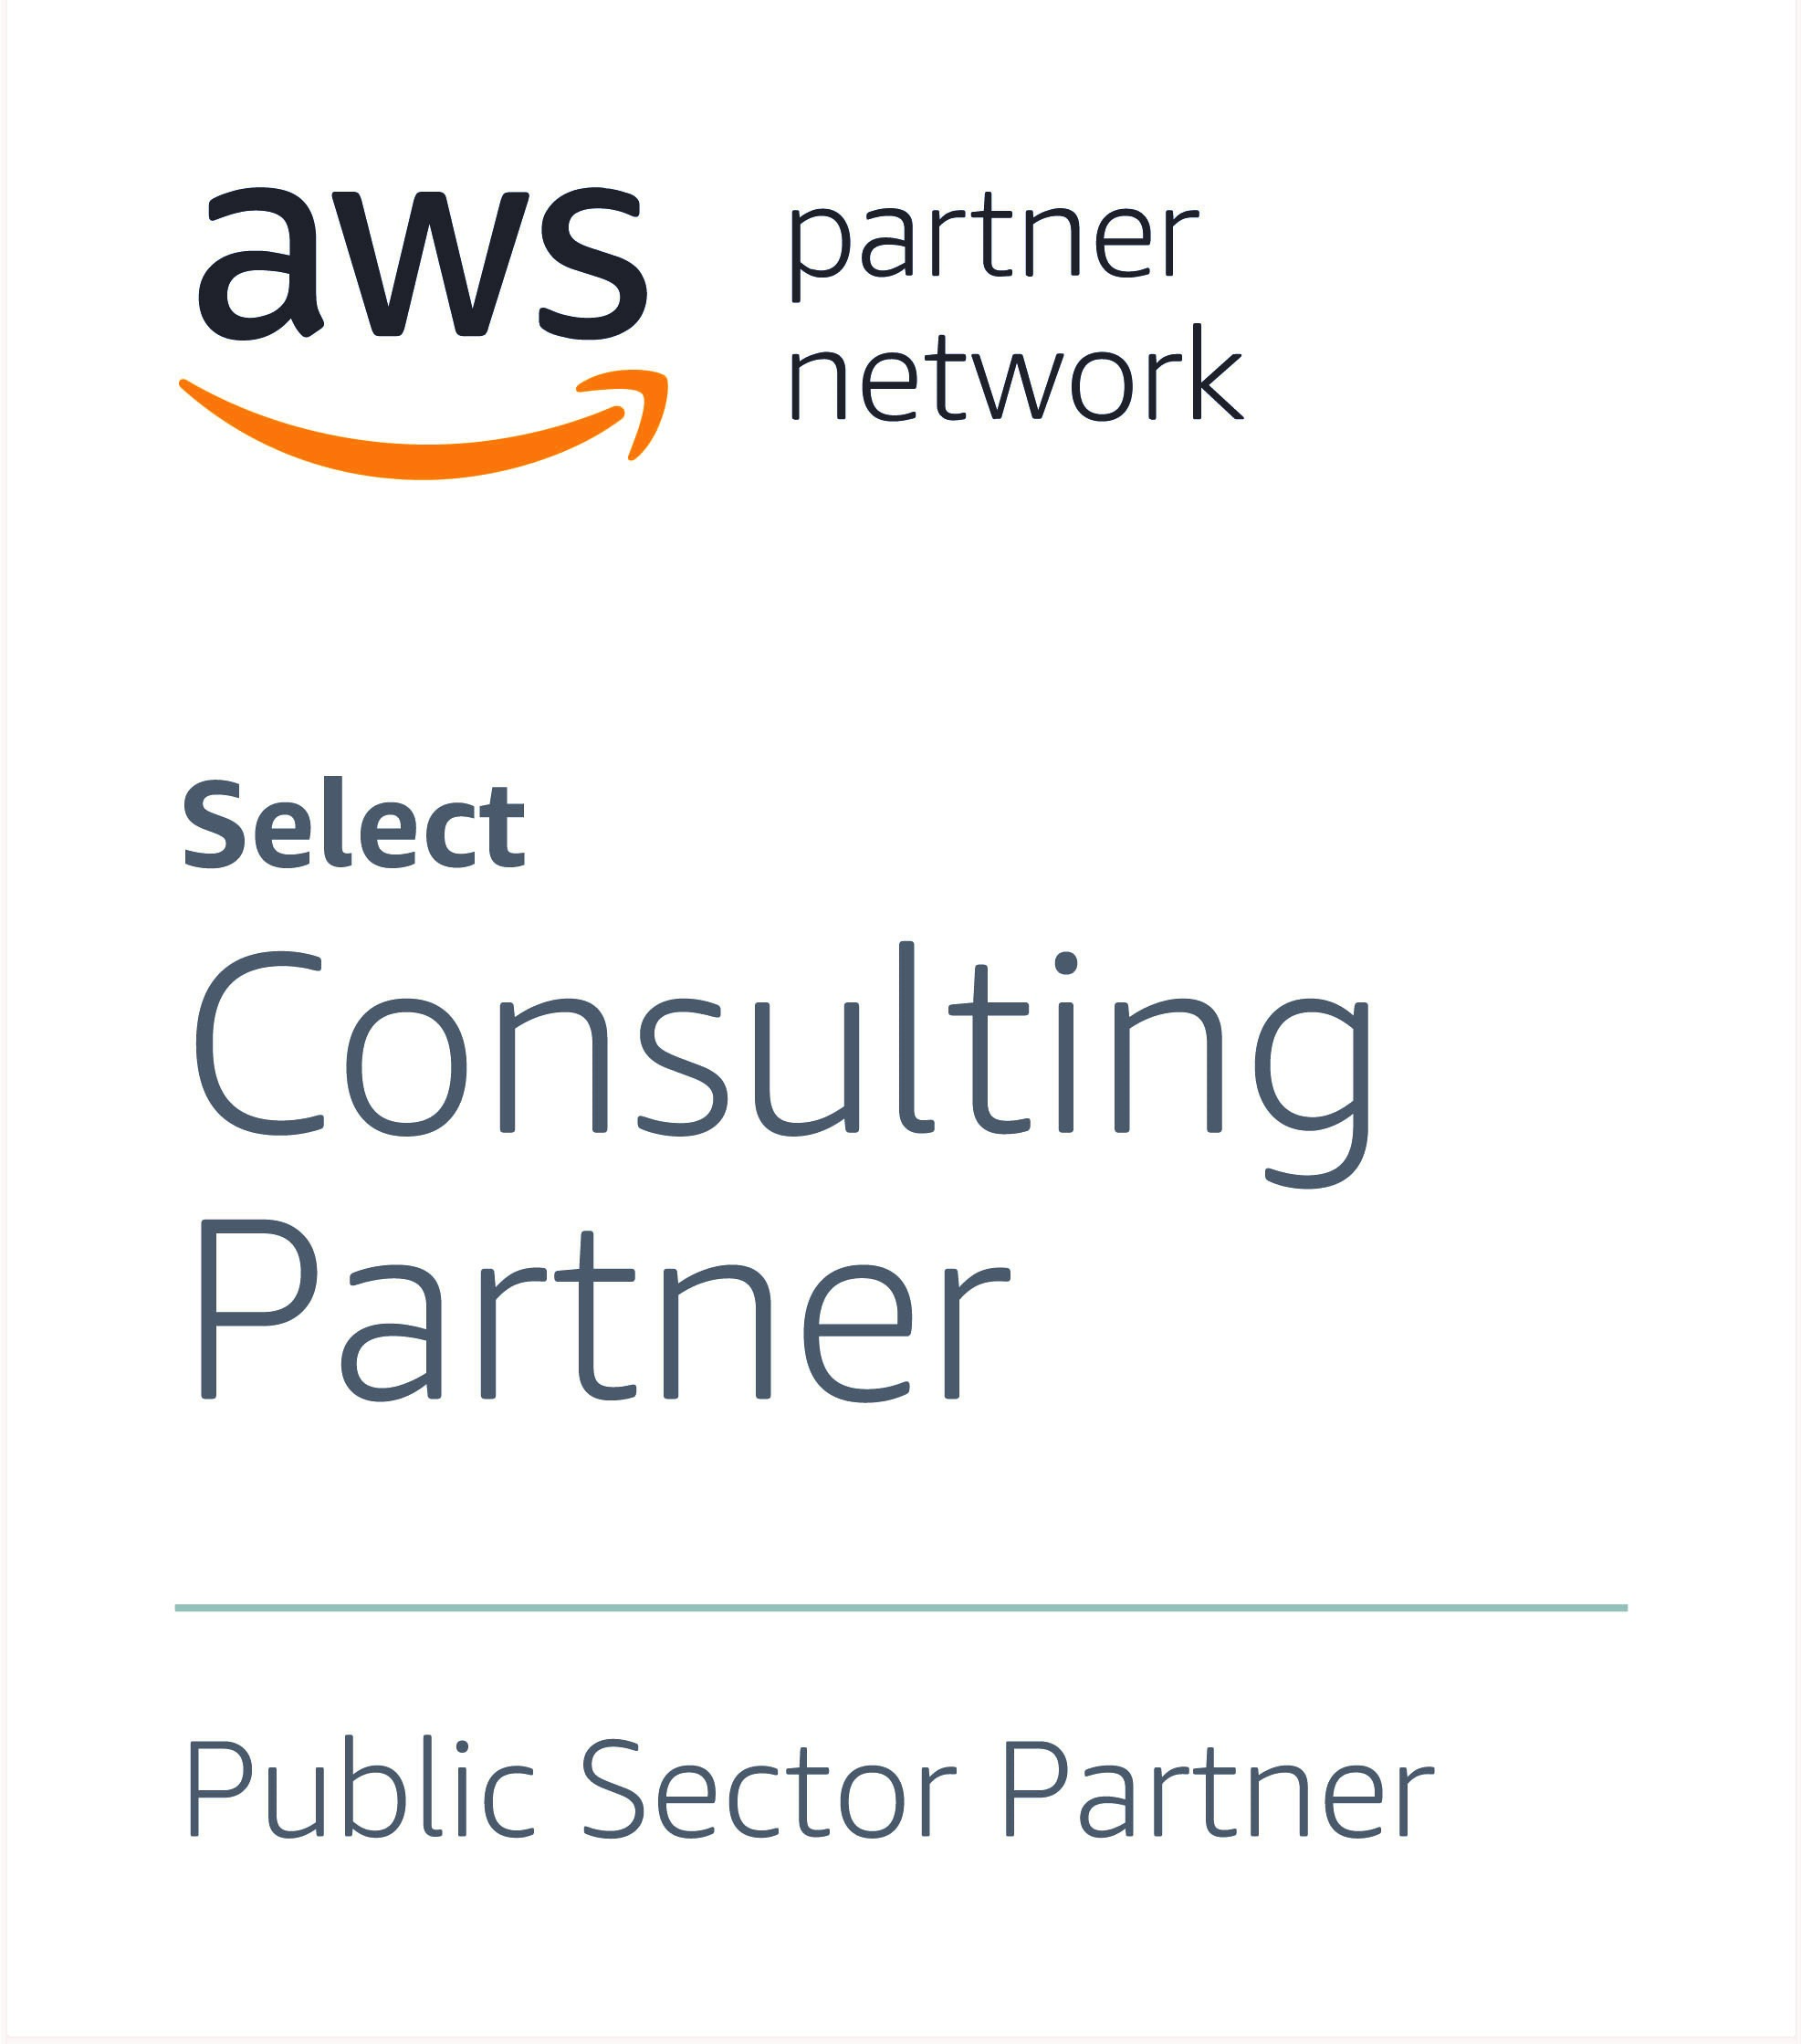 Logo demonstrating Exception is an AWS Select Consulting partner and Public Sector Partner